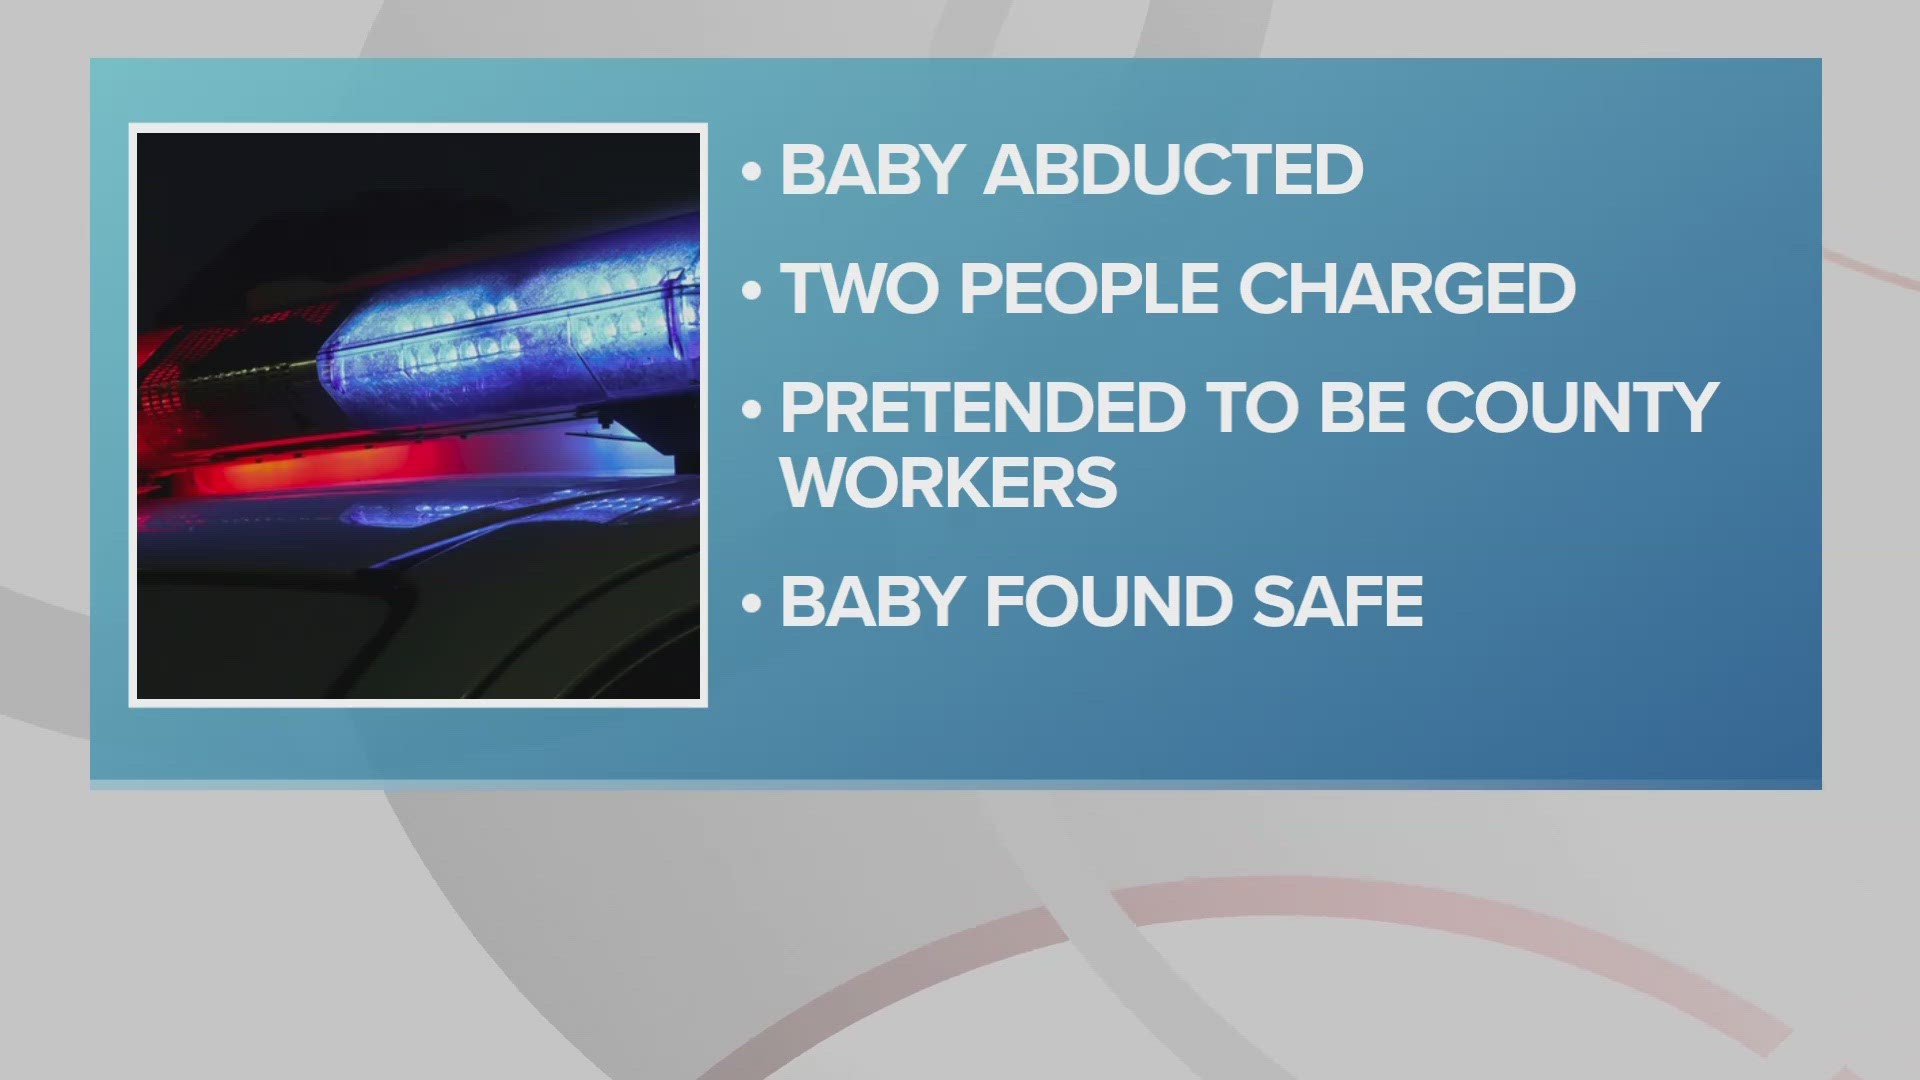 The suspects were arrested in Coshocton County and the baby was recovered unharmed.